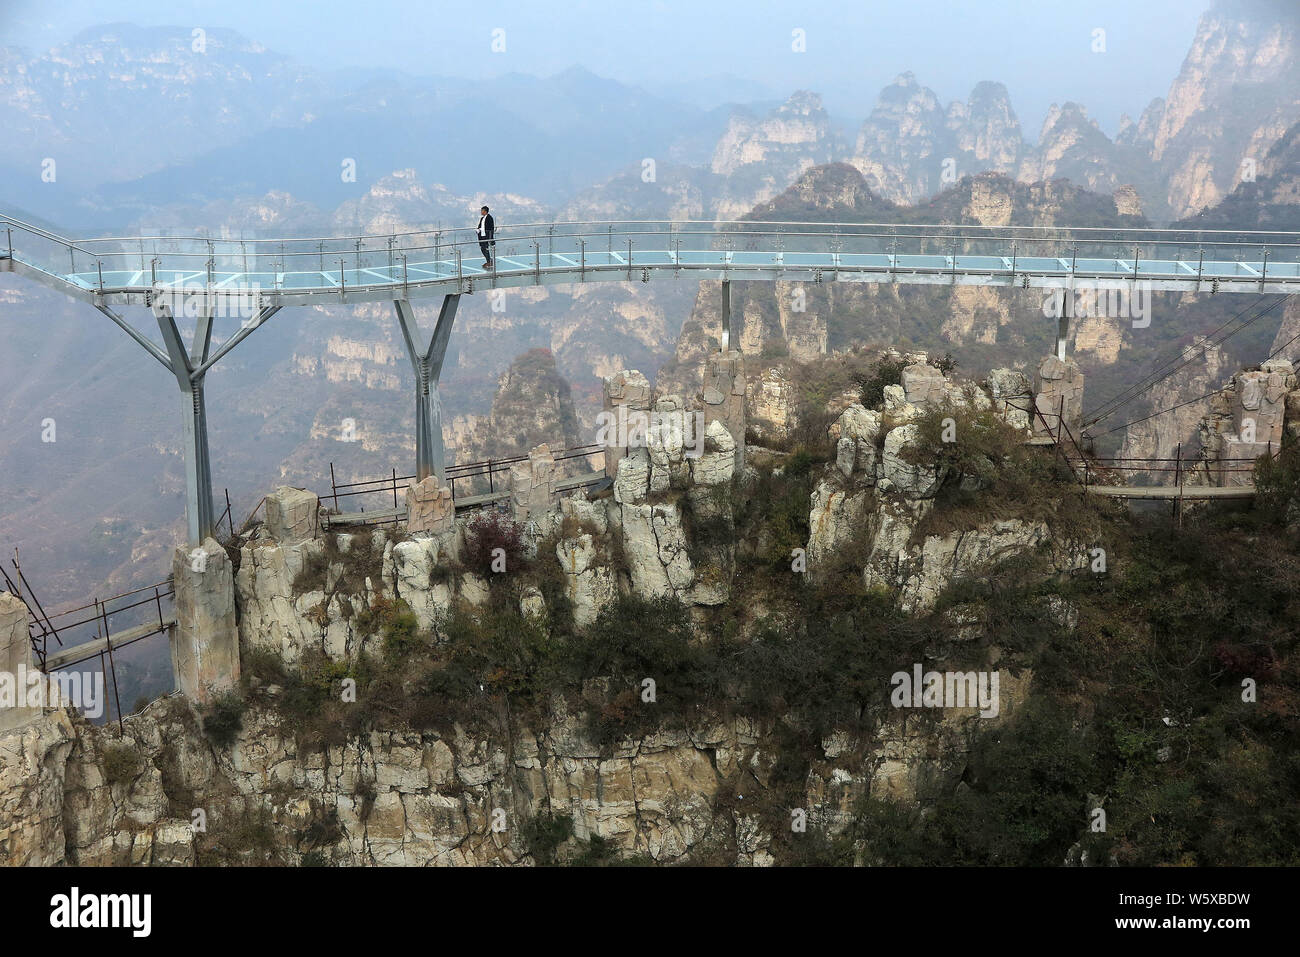 Tourists walk on the glass skywalk 'suspended' in the air along the cliff of Mount Langya in Baoding city, north China's Hebei province, 16 October 20 Stock Photo